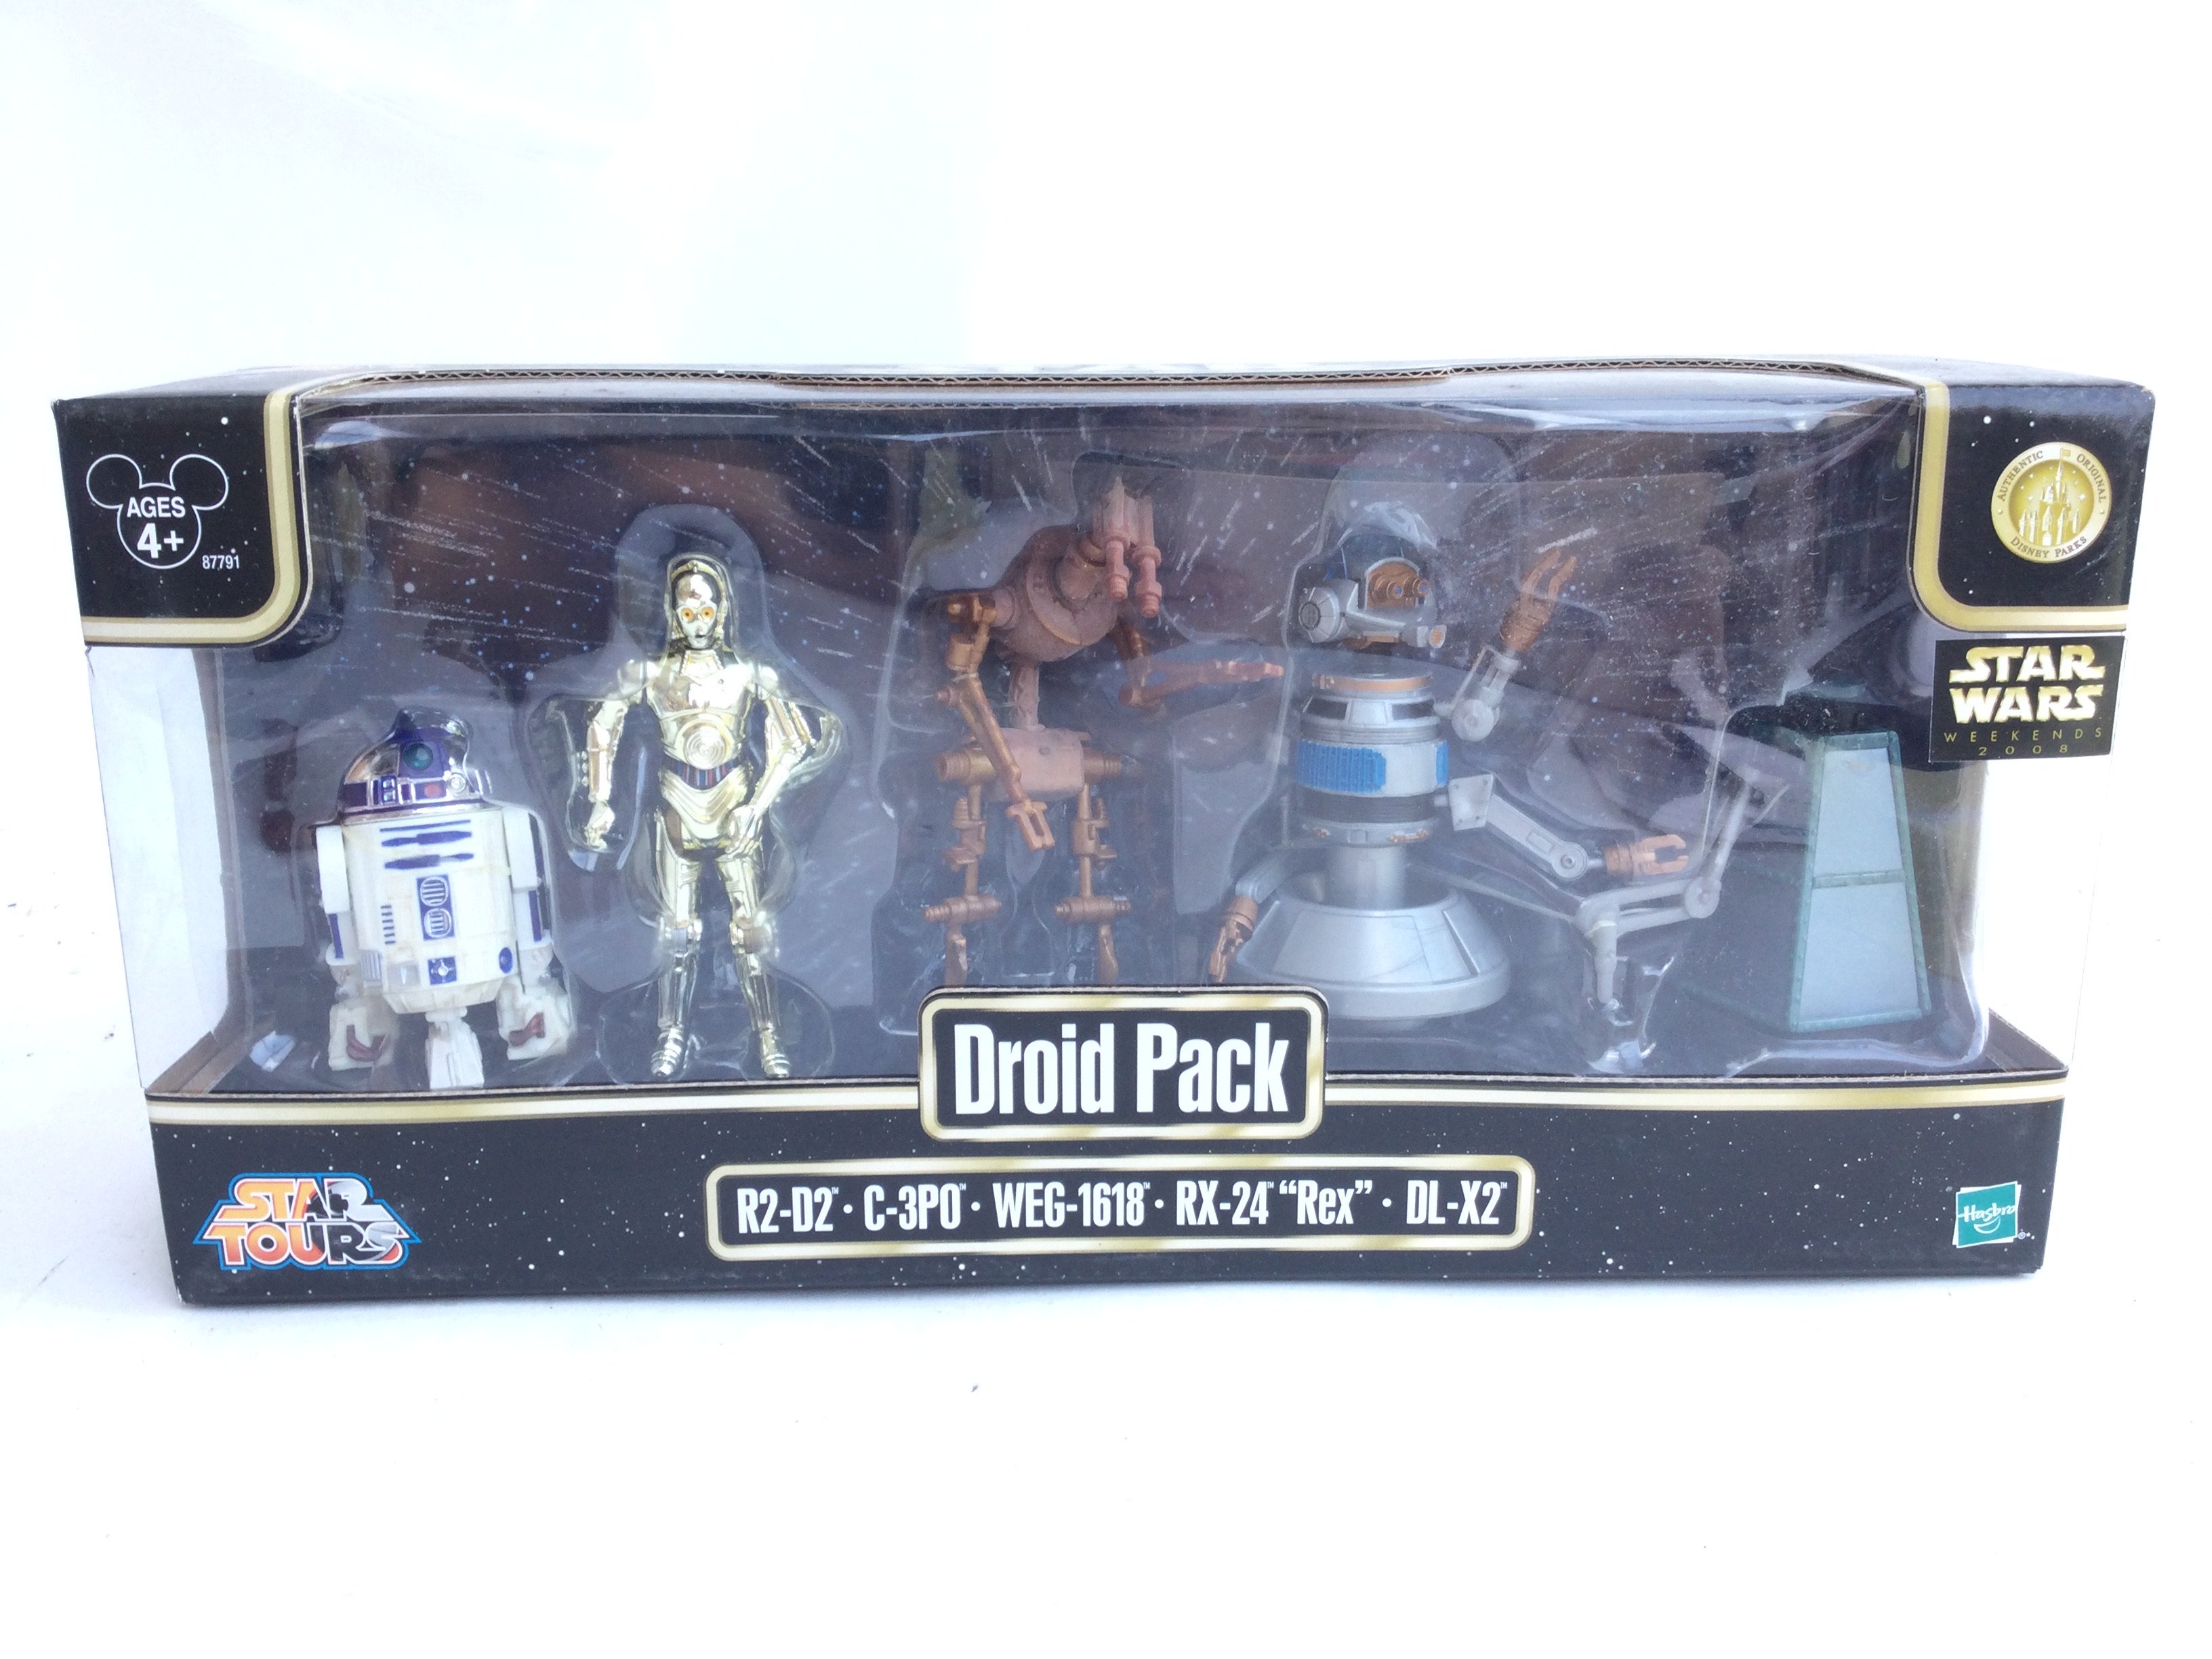 A Boxed Star Wars Star Tours Droid Pack.